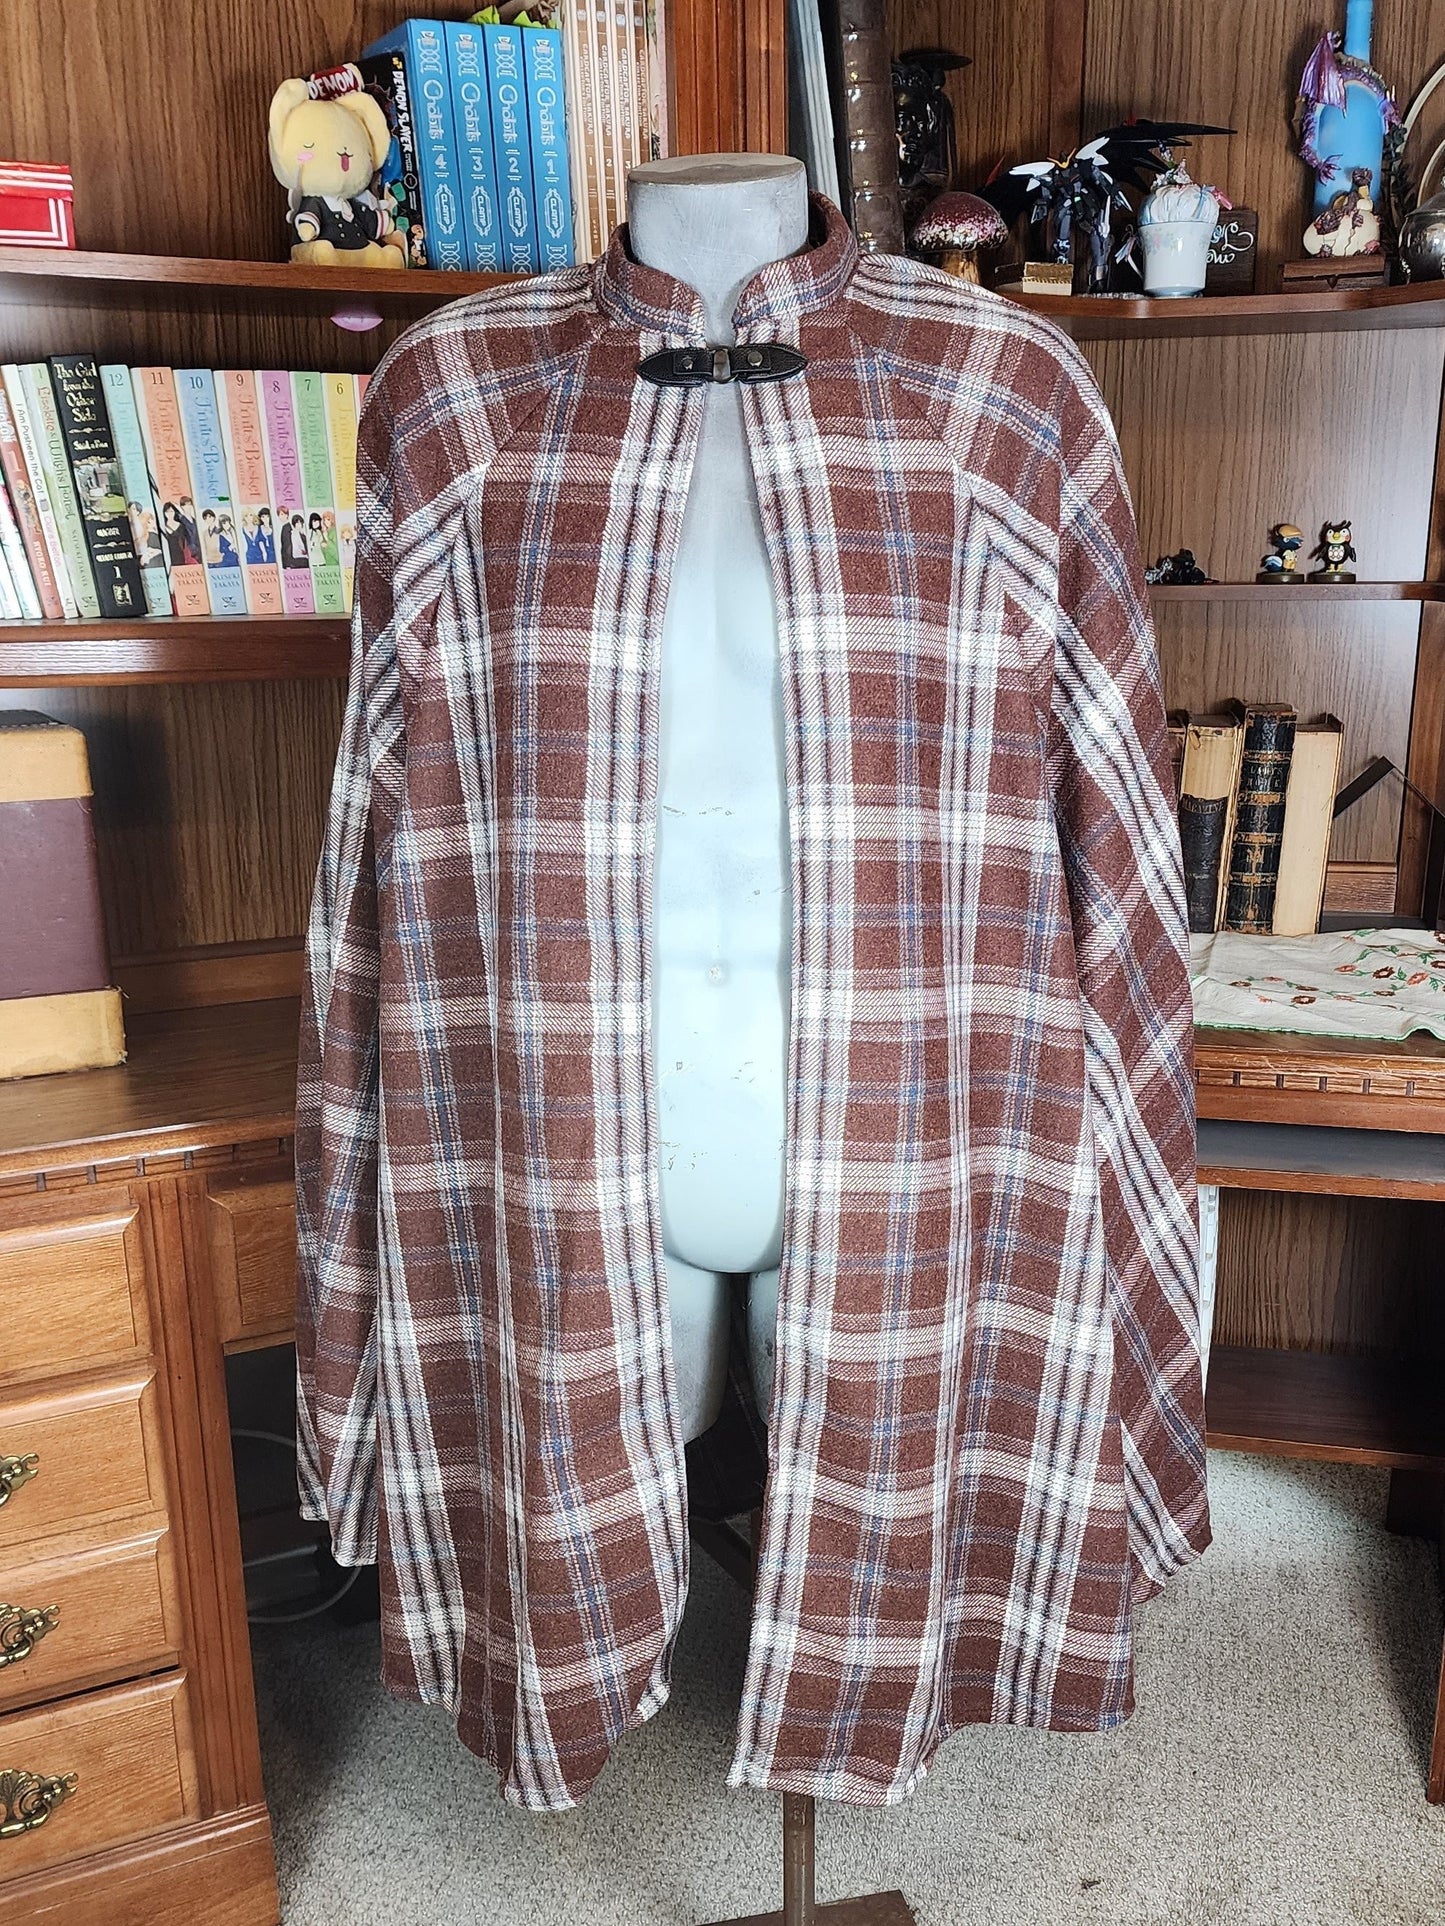 Market Day Cape- Brown Plaid Wool Blend Mid-Length Cape with Collar and Arm Slits